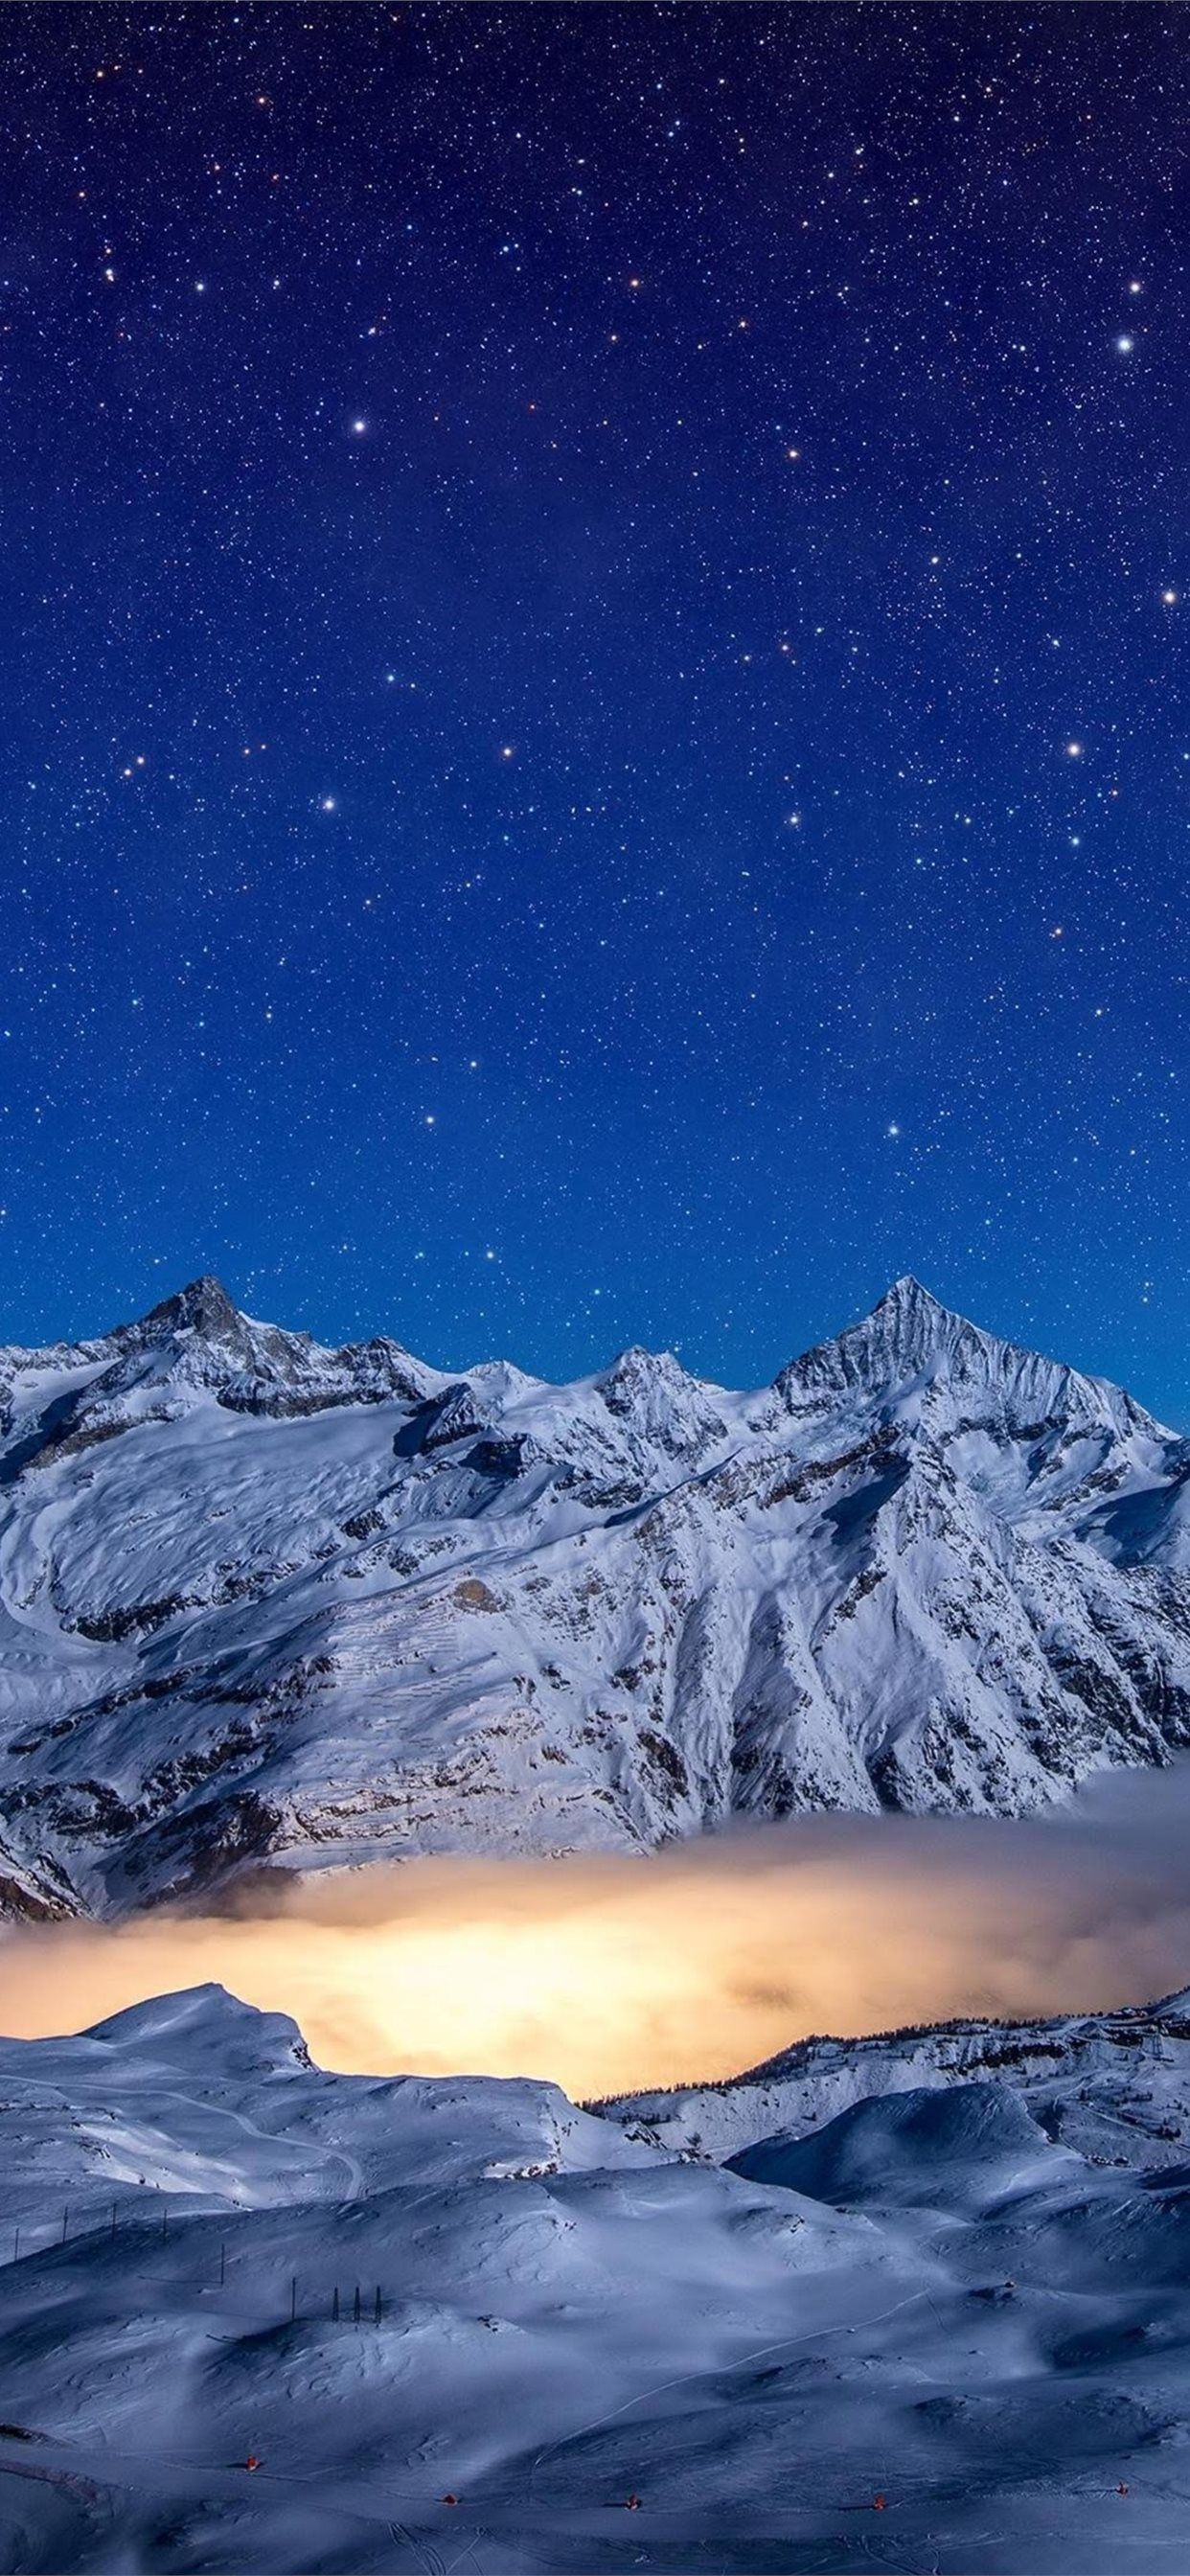 starry night snow covered mountains 4k iPhone 11 Wallpaper Free Download